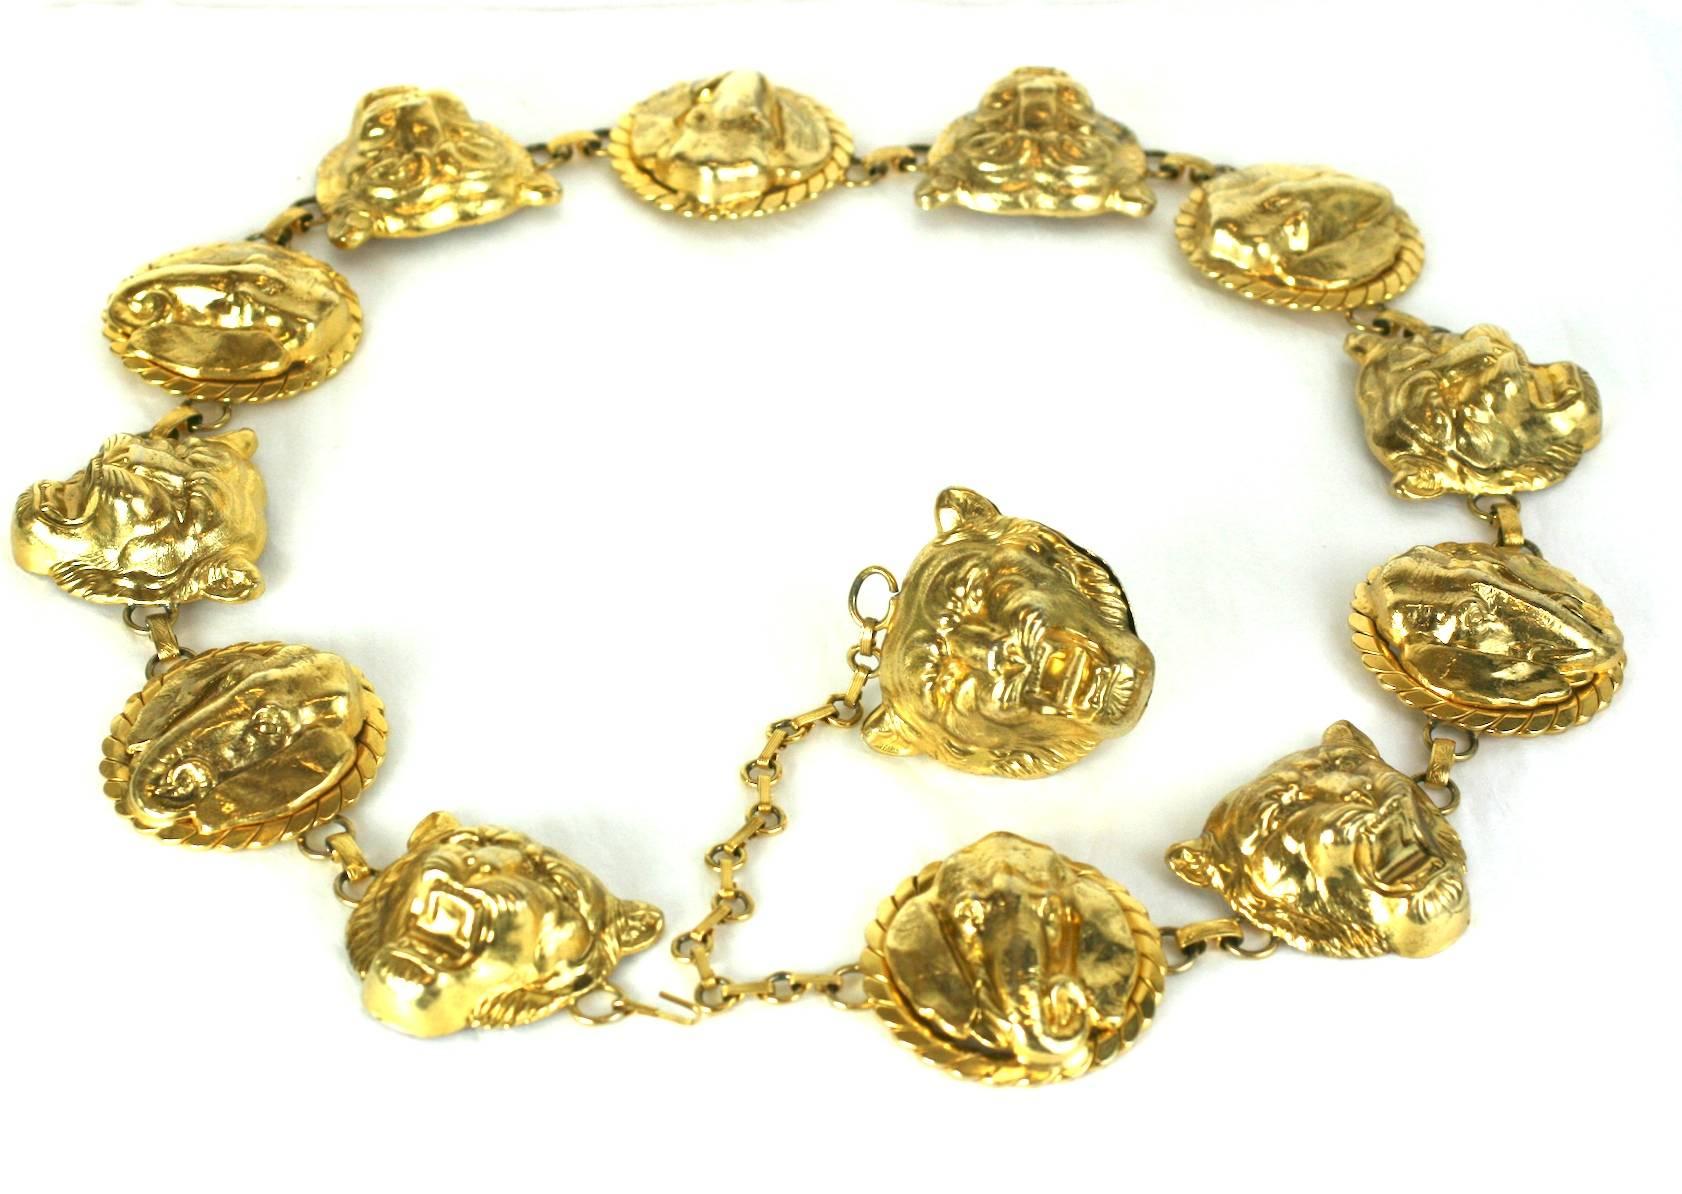 Striking Gilt Lion and Elephant Link Belt with adjustable chain and 3D lion fob drop. 
33